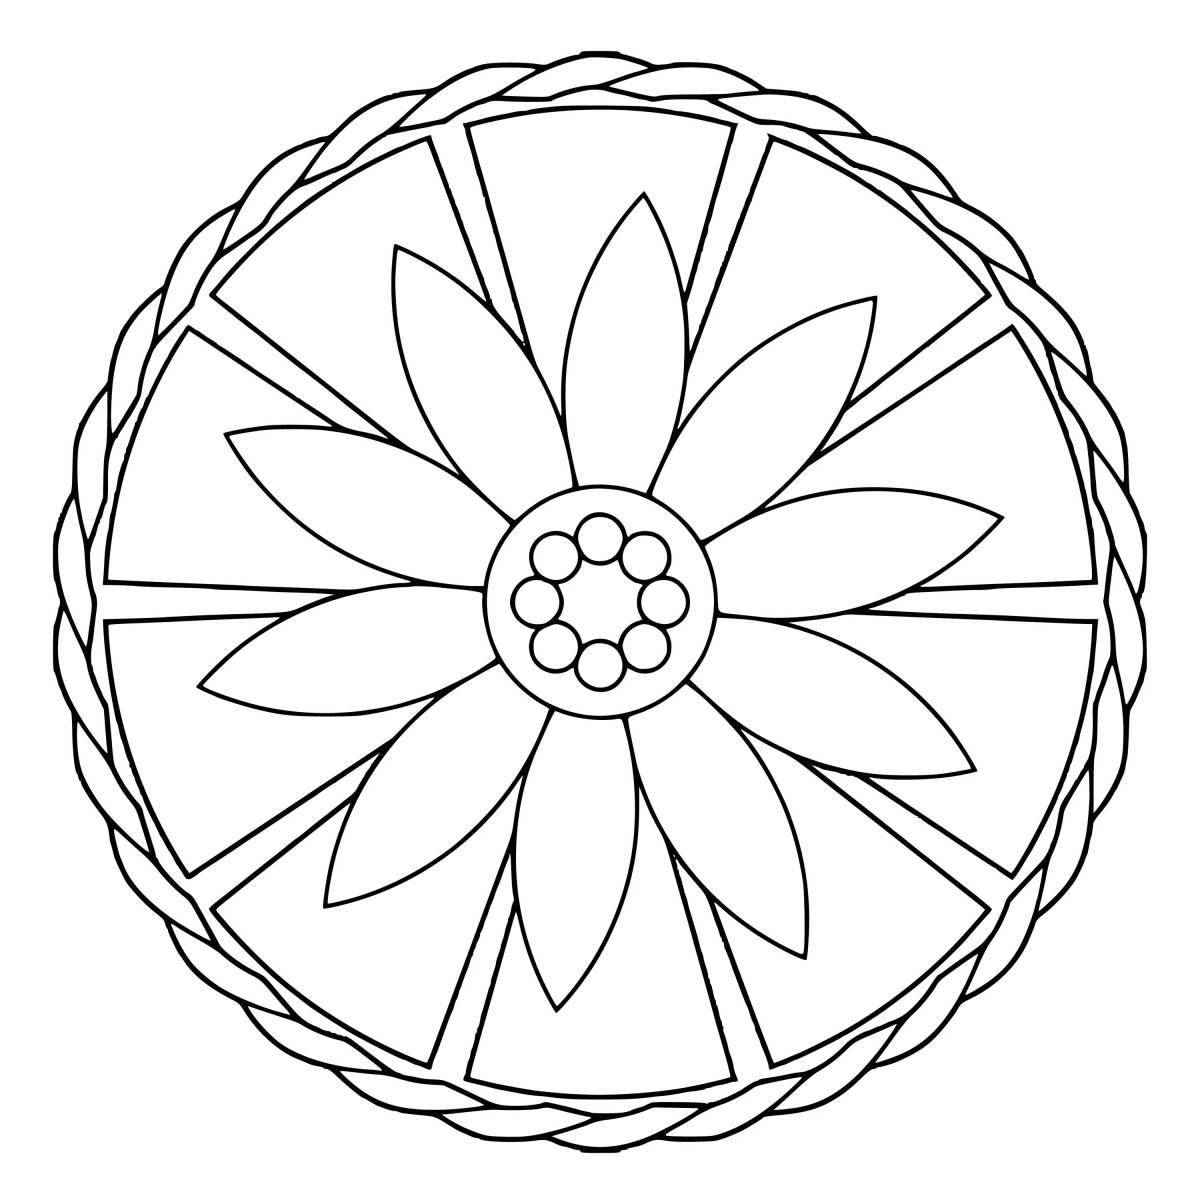 Lovely circle pattern coloring page